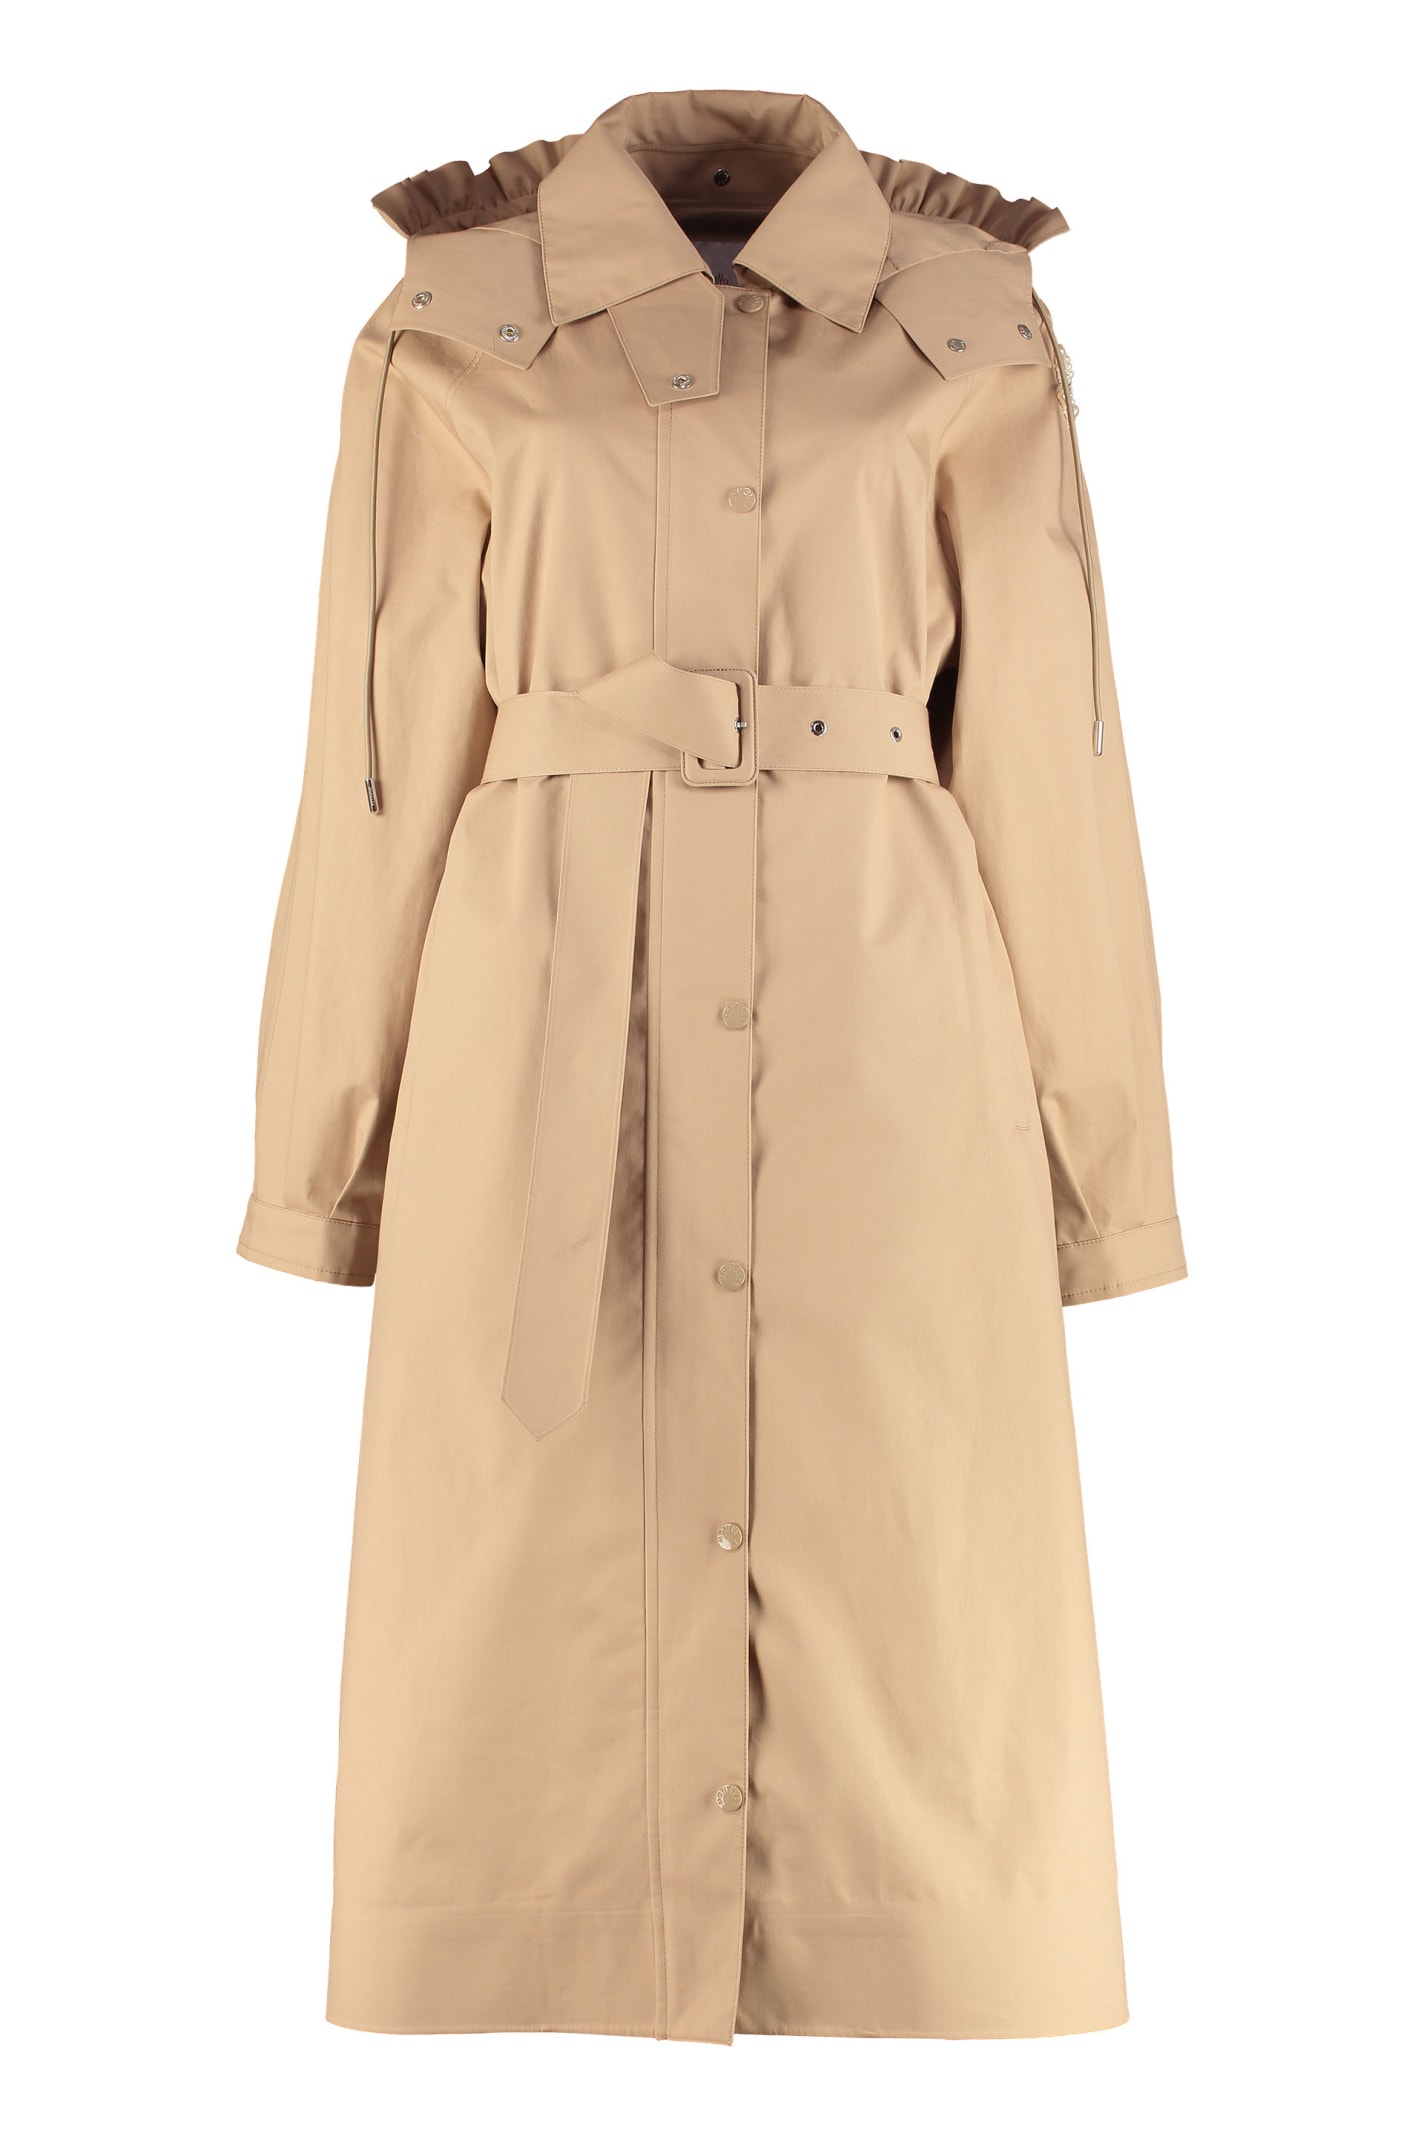 Moncler Genius Silene Hooded Trench Coat | italist, ALWAYS LIKE A SALE